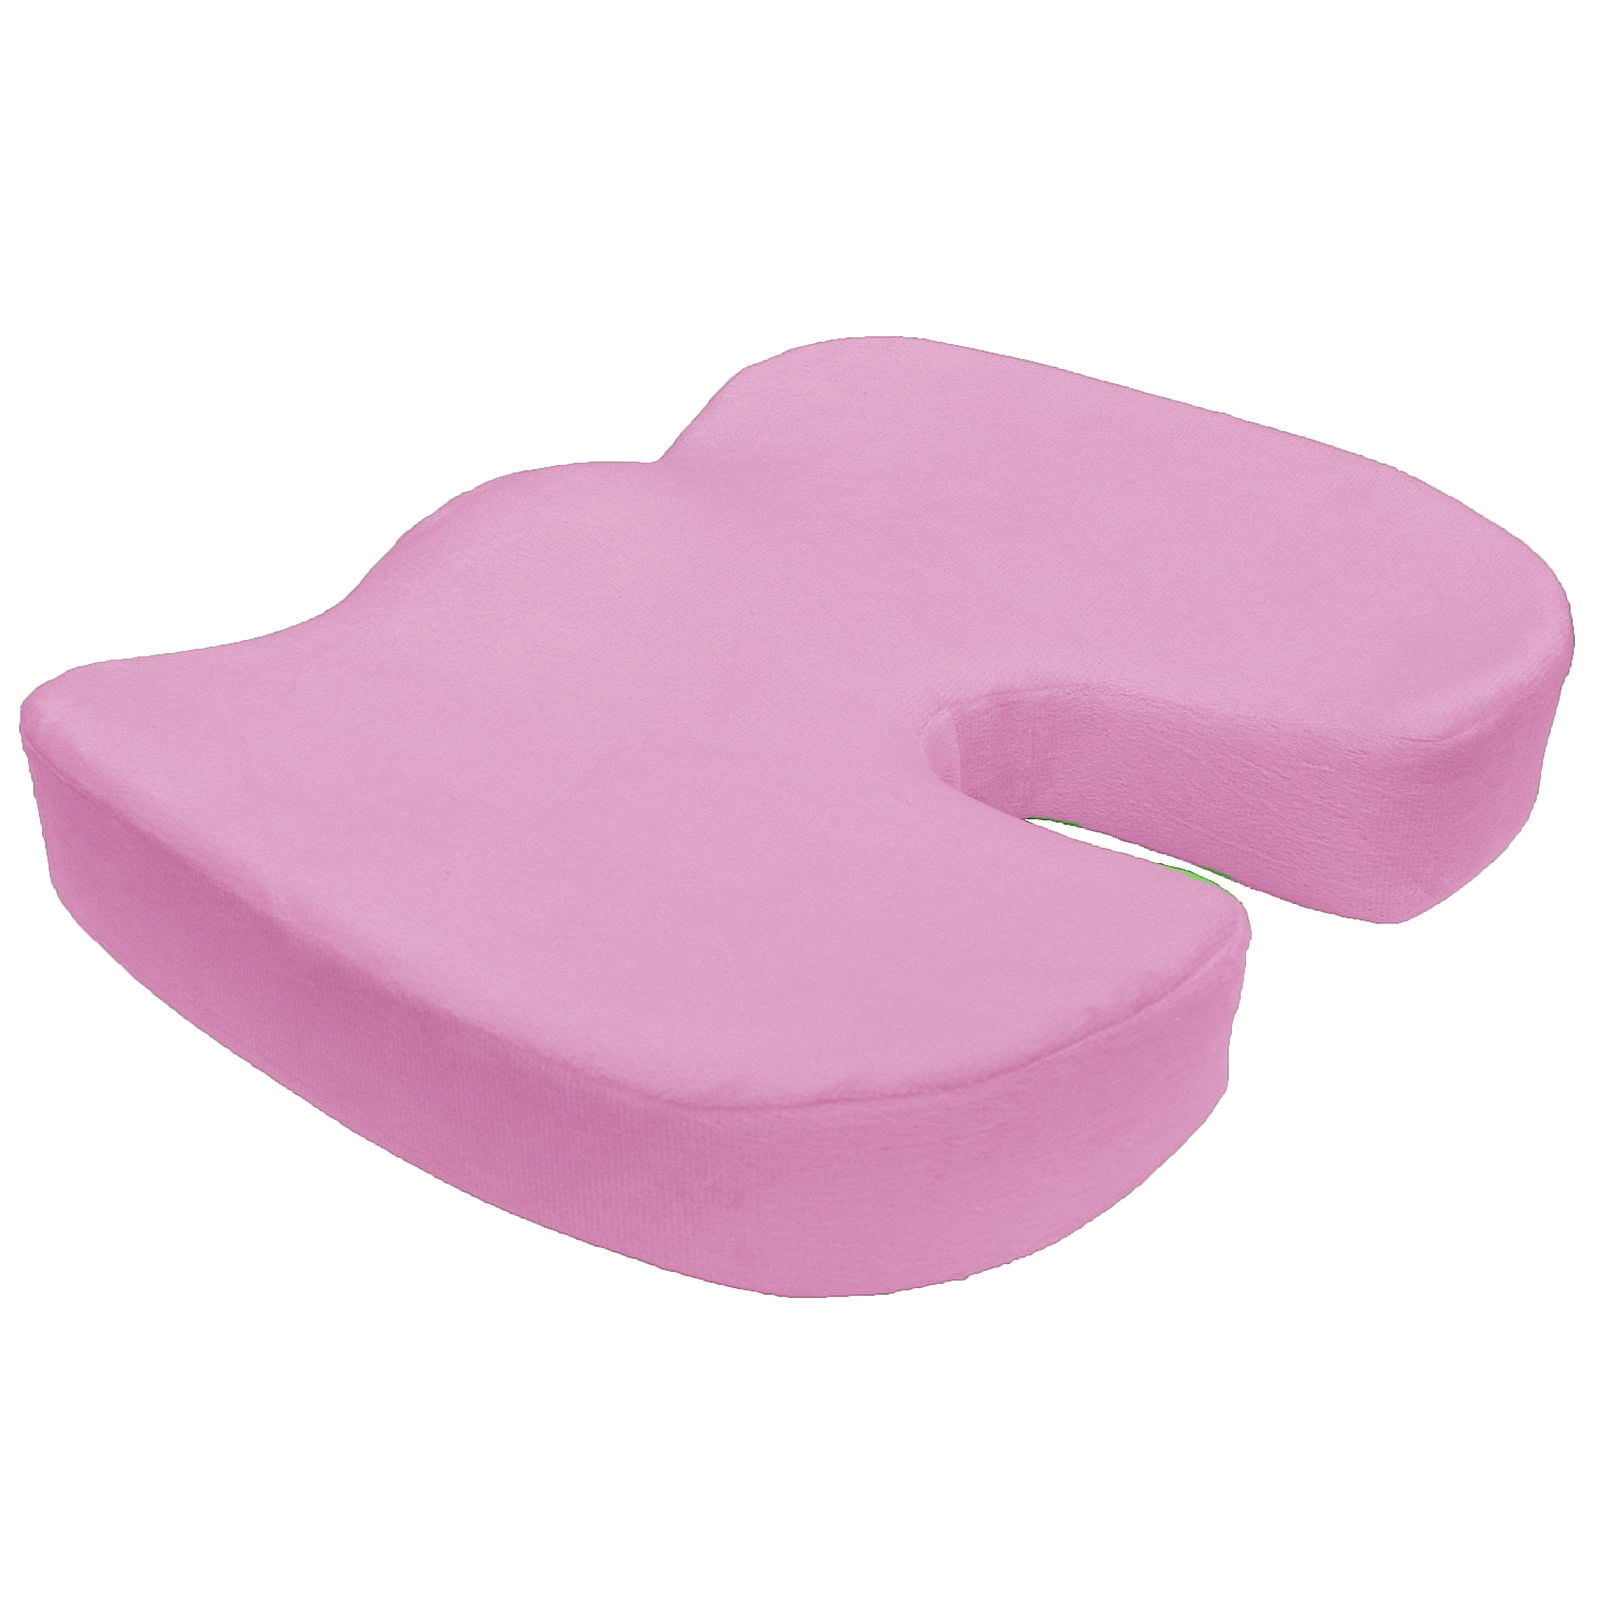  Pink Upholstery Foam Seat Pad Replacement Memory Foams